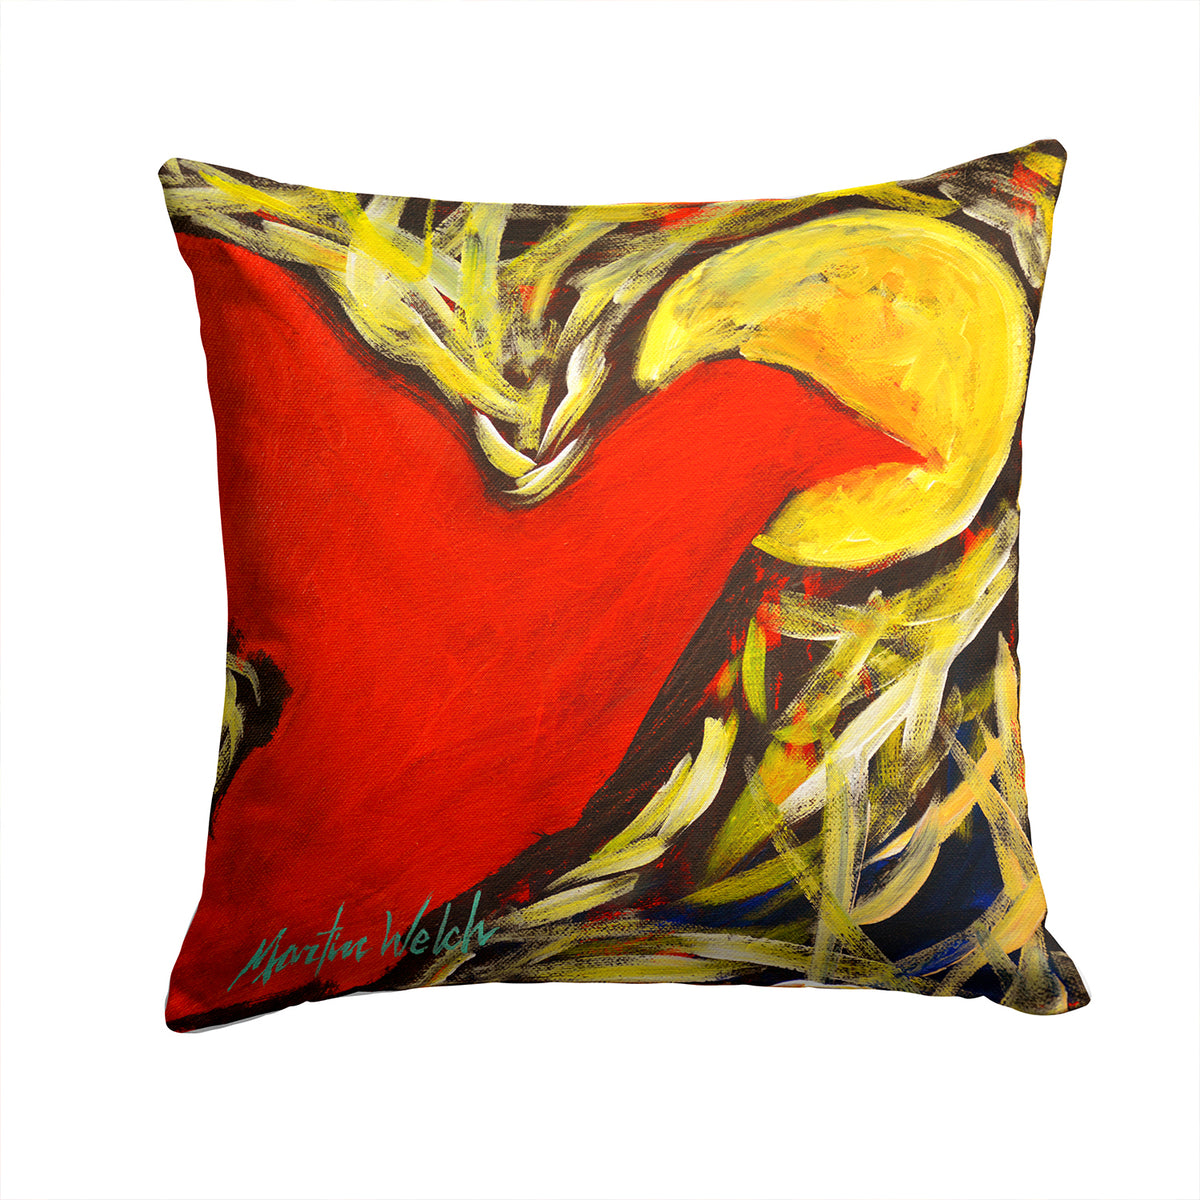 Crow at Midnight Fabric Decorative Pillow MW1323PW1414 - the-store.com